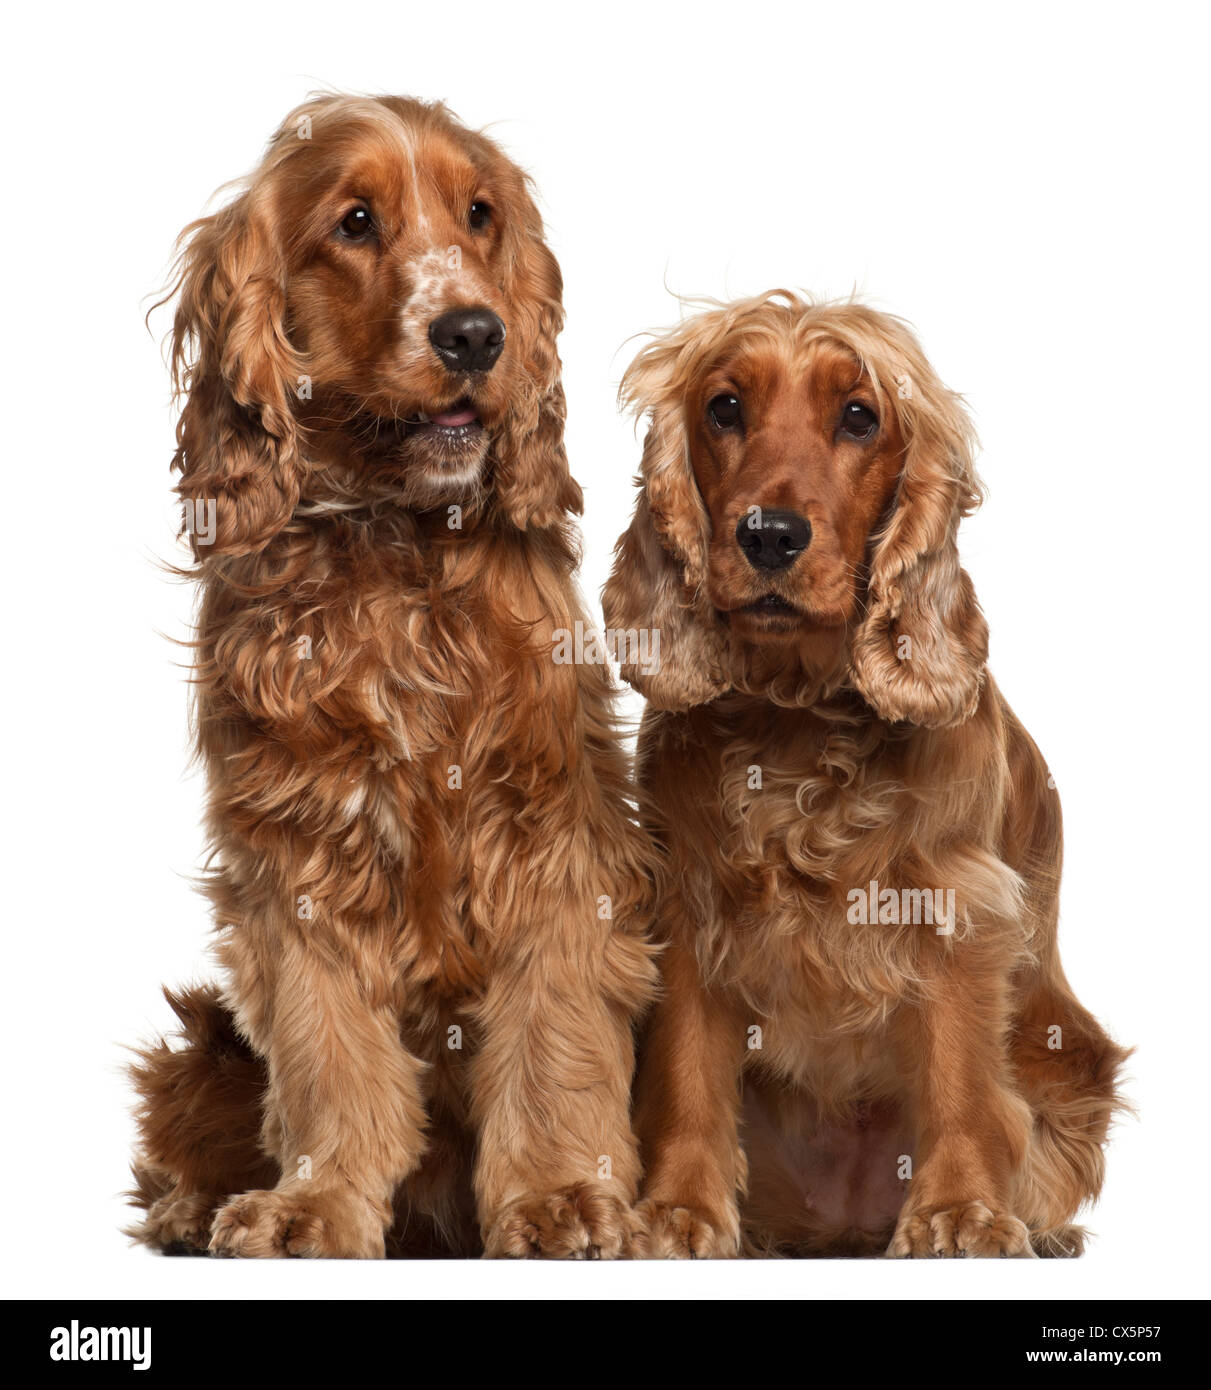 English Cocker Spaniels, 16 months old, sitting against white background Stock Photo